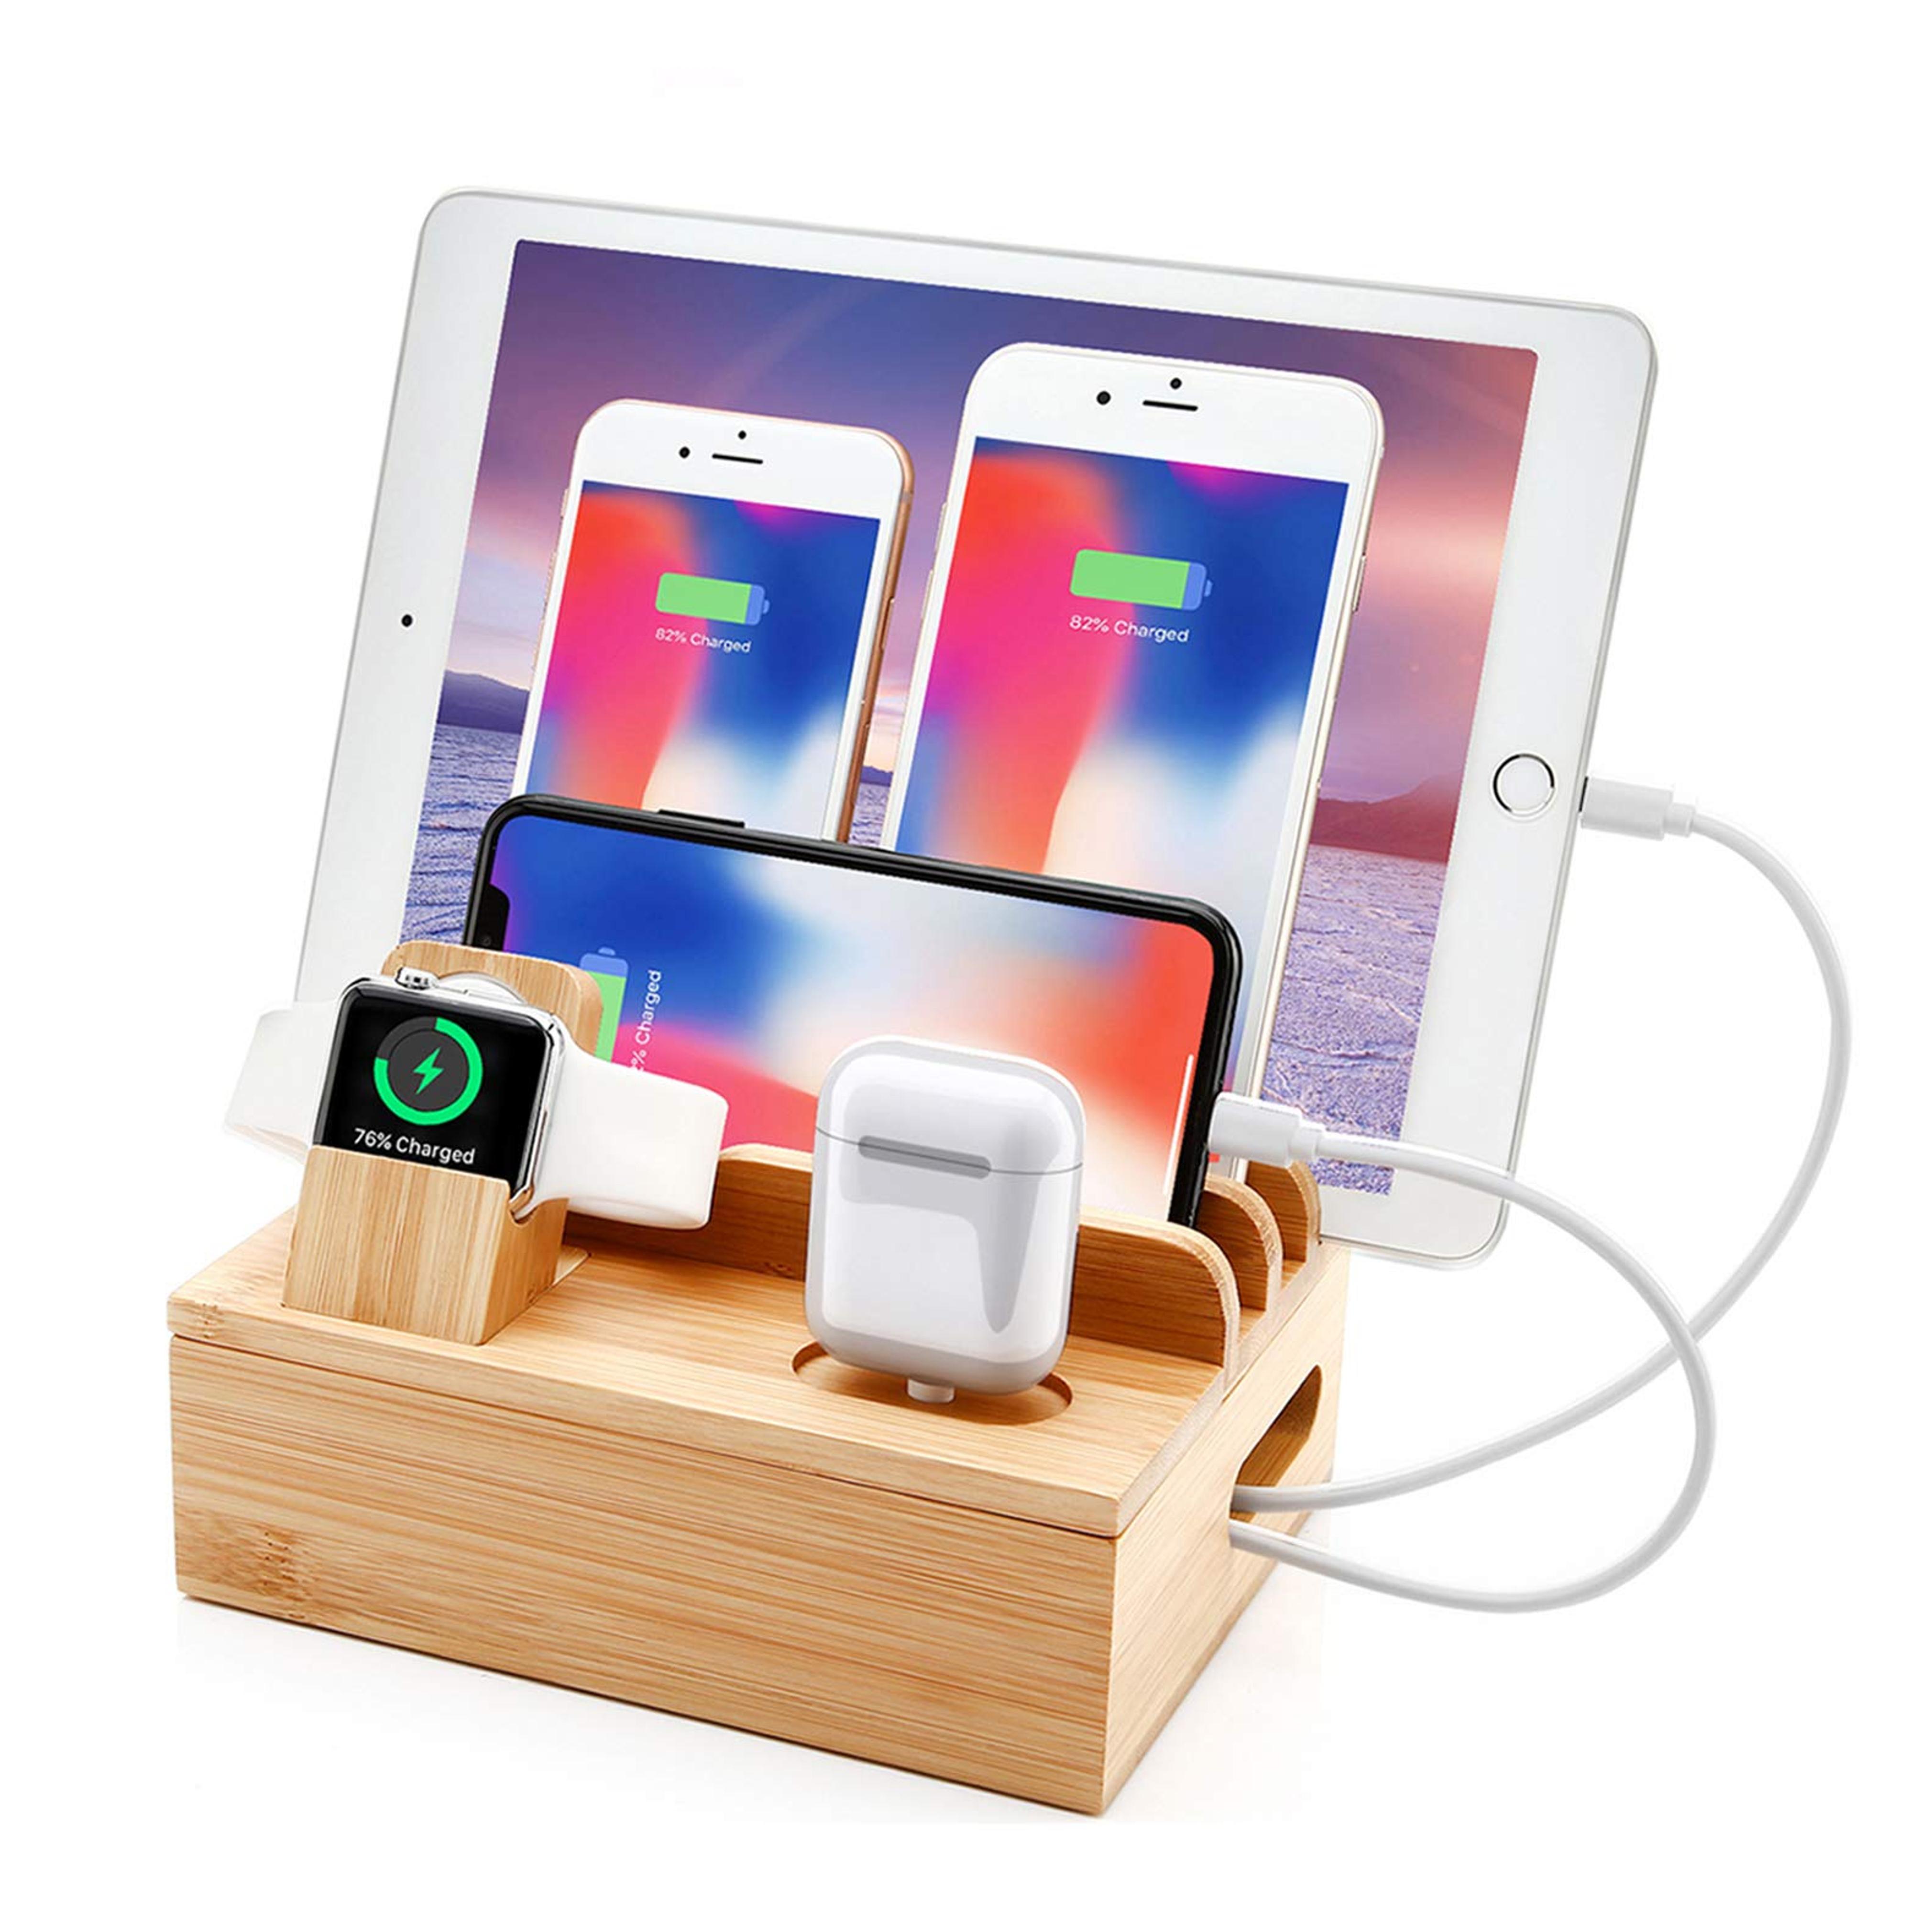 Amazon.com: Bamboo Charging Station for Multi Device with 5 USB A Charger Port Sendowtek 6 in 1 Charging Stand for Phone Tablet Smart Watch Holder Earbud Dock Charger Organizer with Power Supply(no watch charger) : Cell Phones & Accessories